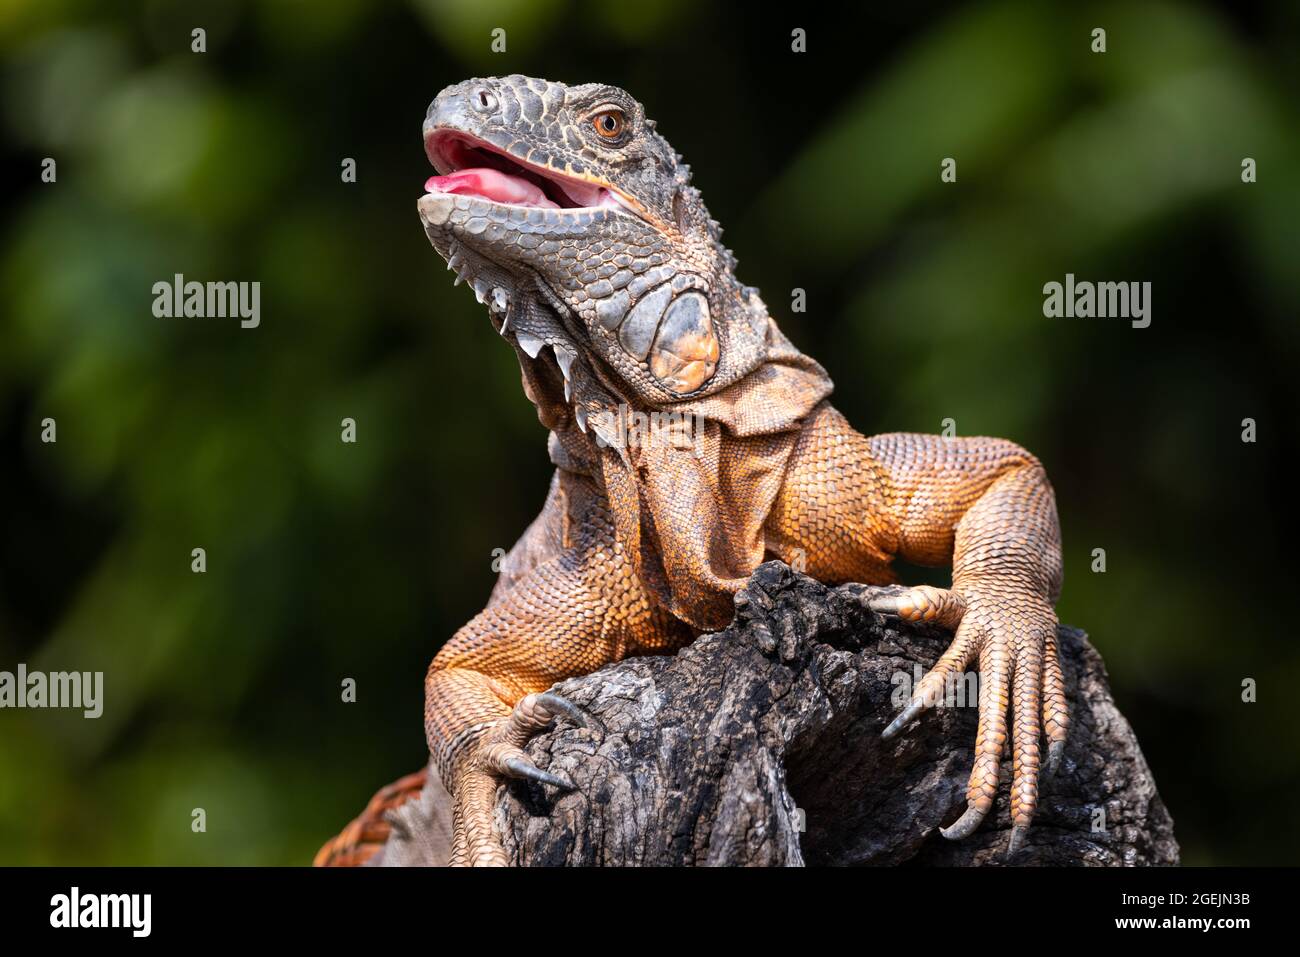 Front close up portrait of a green iguana with orange skin and its mouth open climbing on a tree trunk Stock Photo